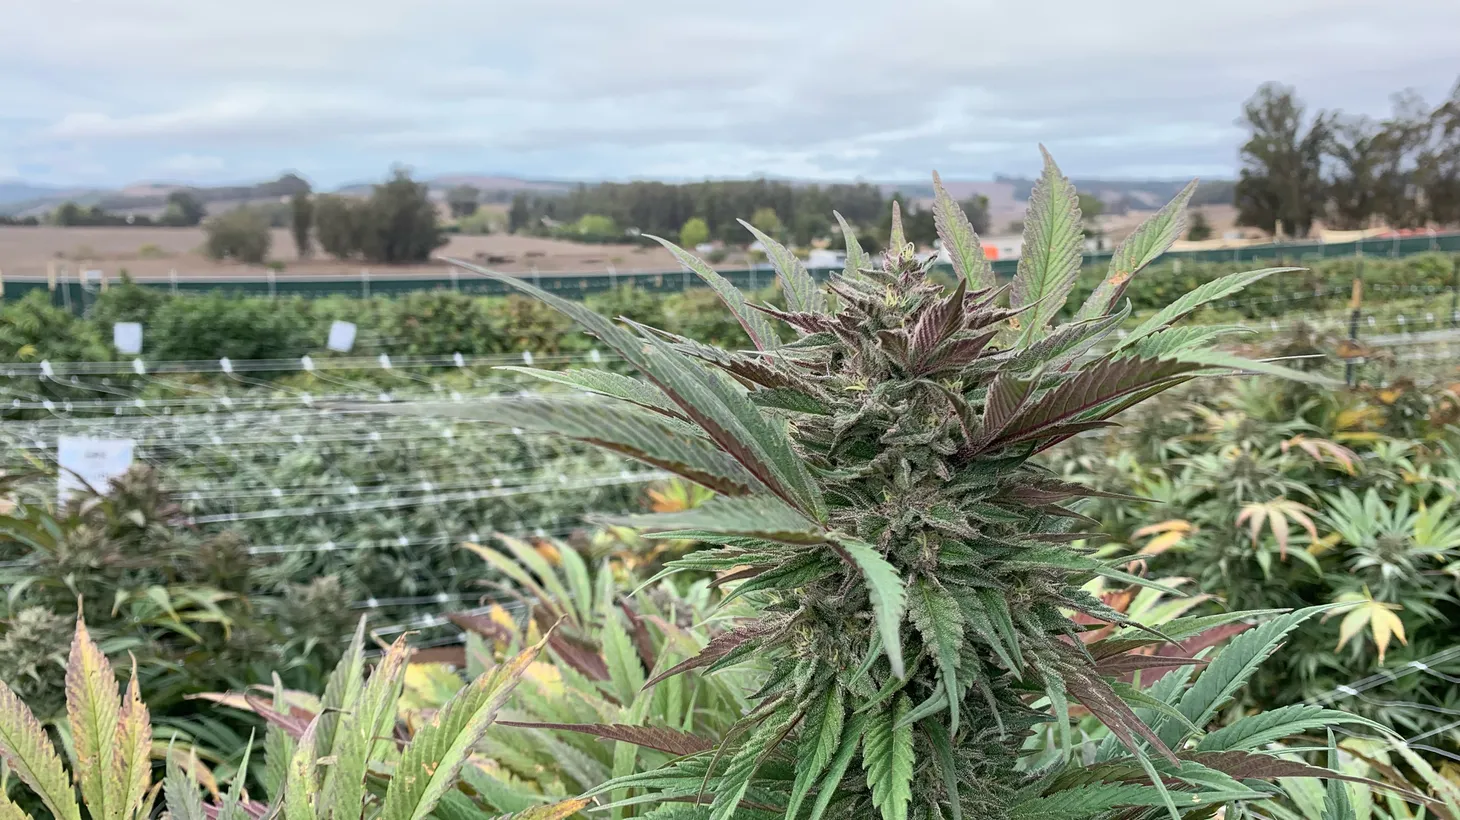 “There's not a flavor out there that you can't find a cannabis corollary for, and we're still on day one of strain development,” Leafly Senior Editor David Downs says of the best strains coming out of this year’s Croptober harvest.